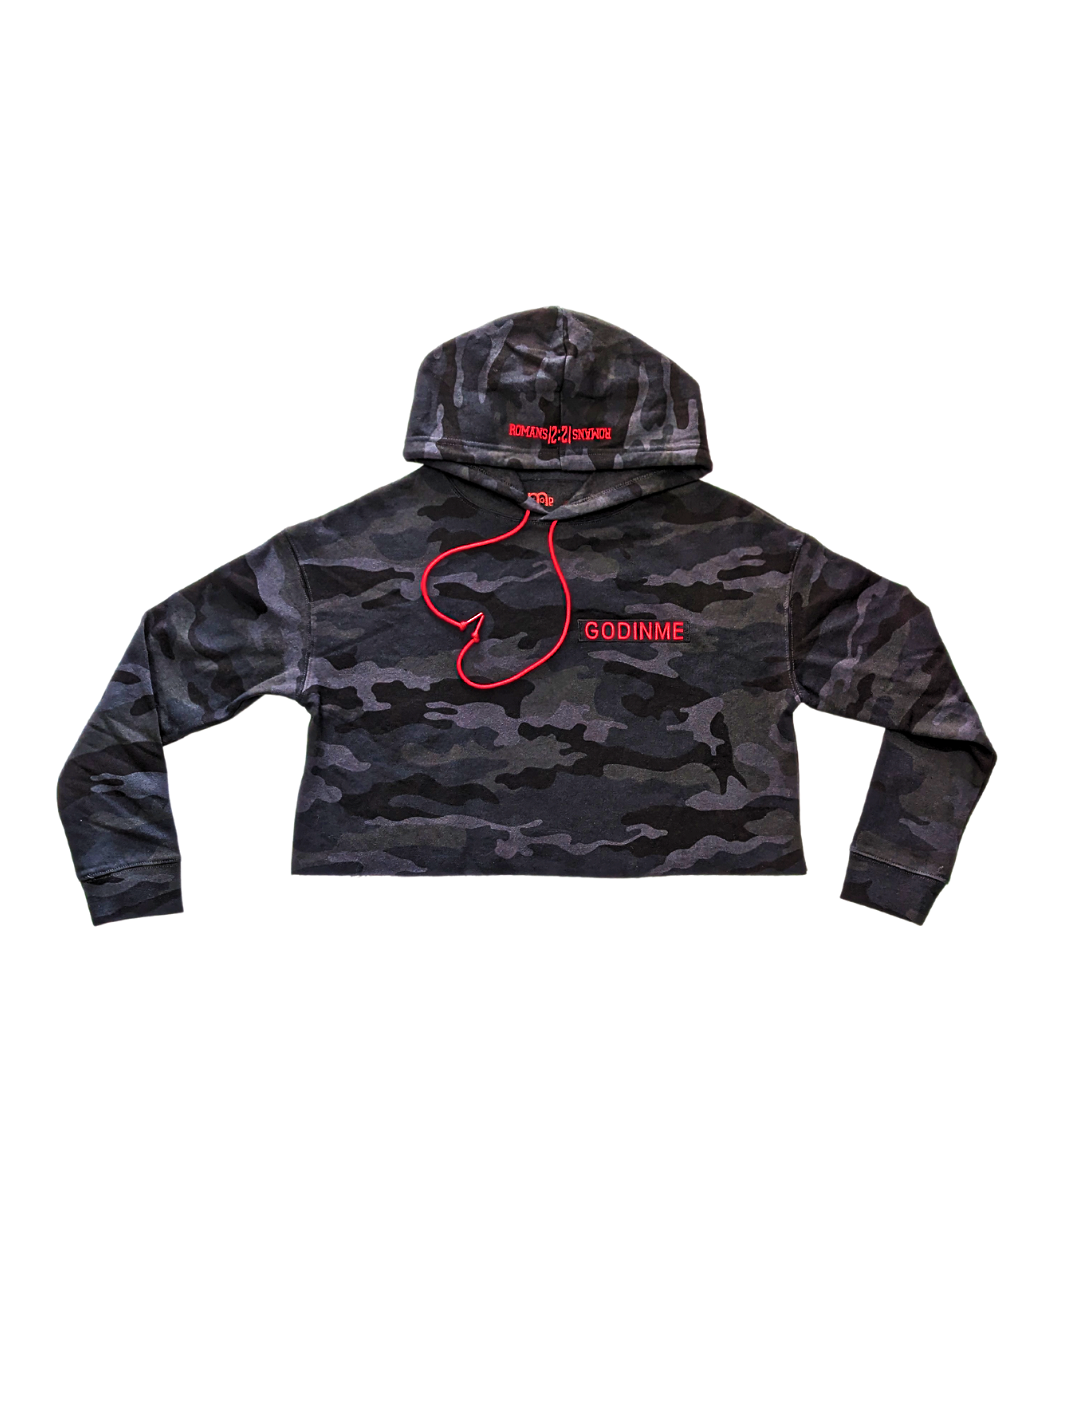 Black Camouflage crop top hoodie, Exclusive Collection, Red GODinme nameplate, Romans 12 ; 21 on hood